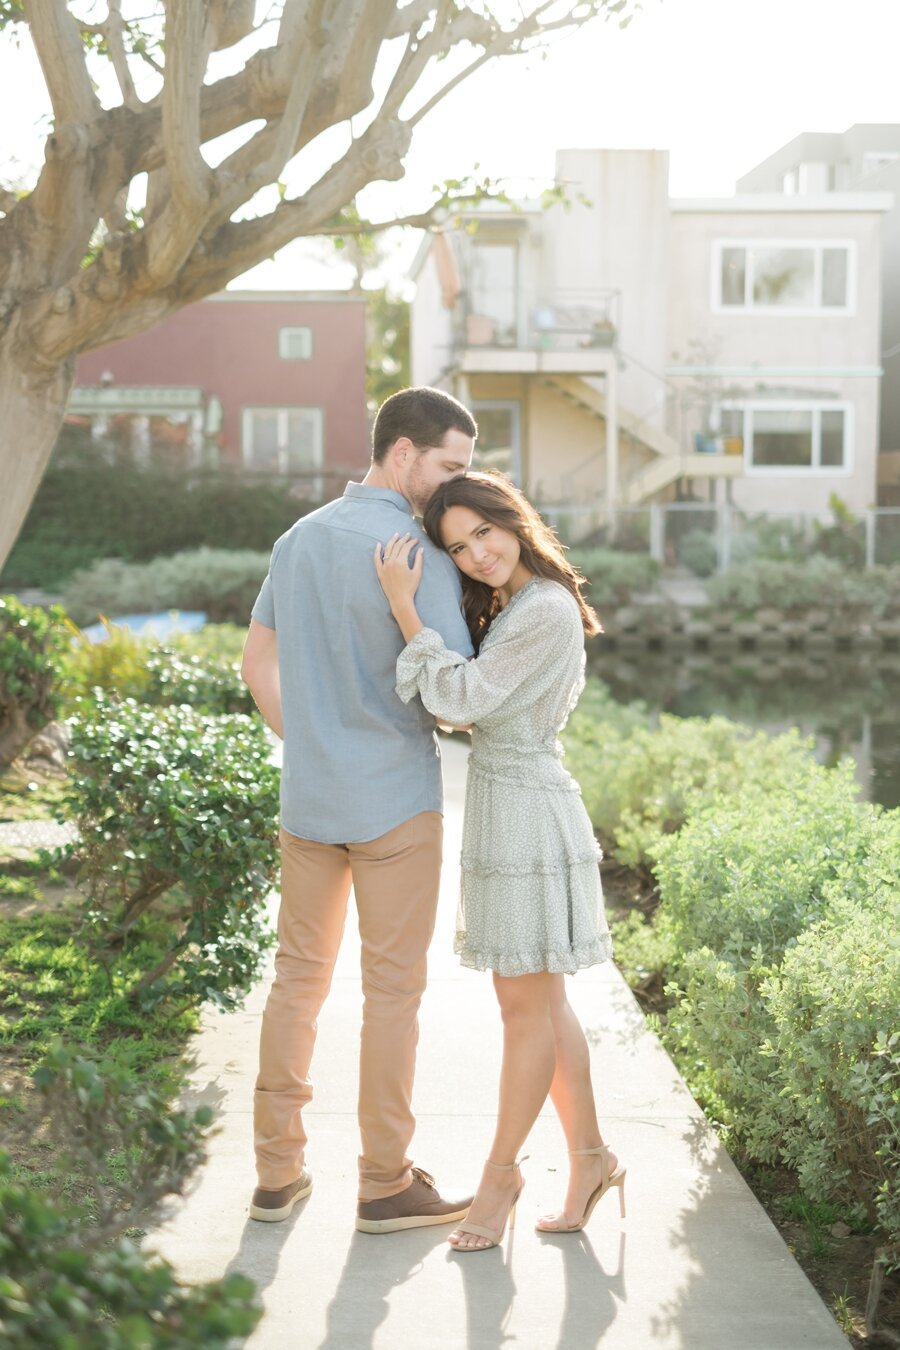 Venice-Beach-Canals-Engagement-Session-Taylor-Kinzie-Photography_1279.jpg